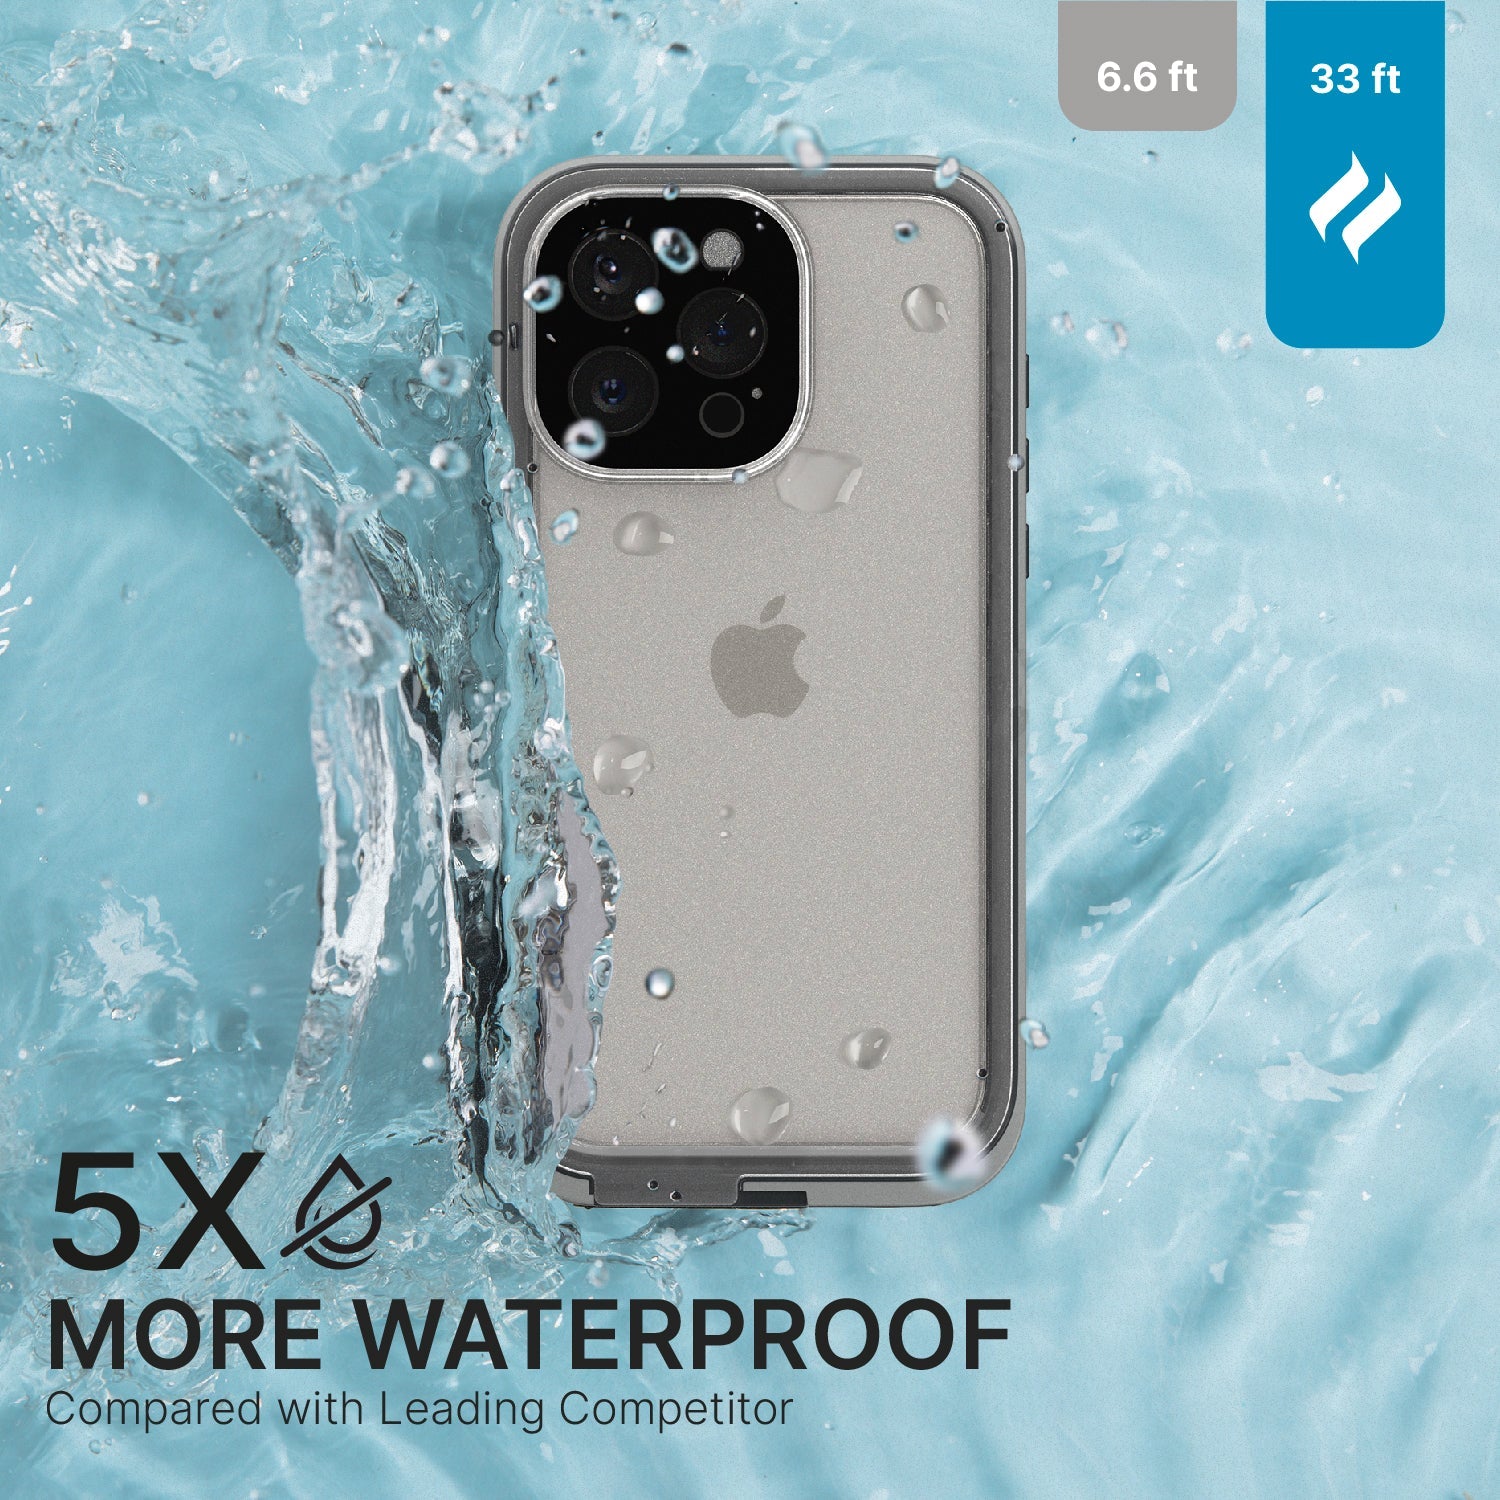 CATIPHO15GRYLP-FBA | Catalyst iPhone 15 Pro Max Waterproof Case Total Protection case splashed in water 5 times more waterproof